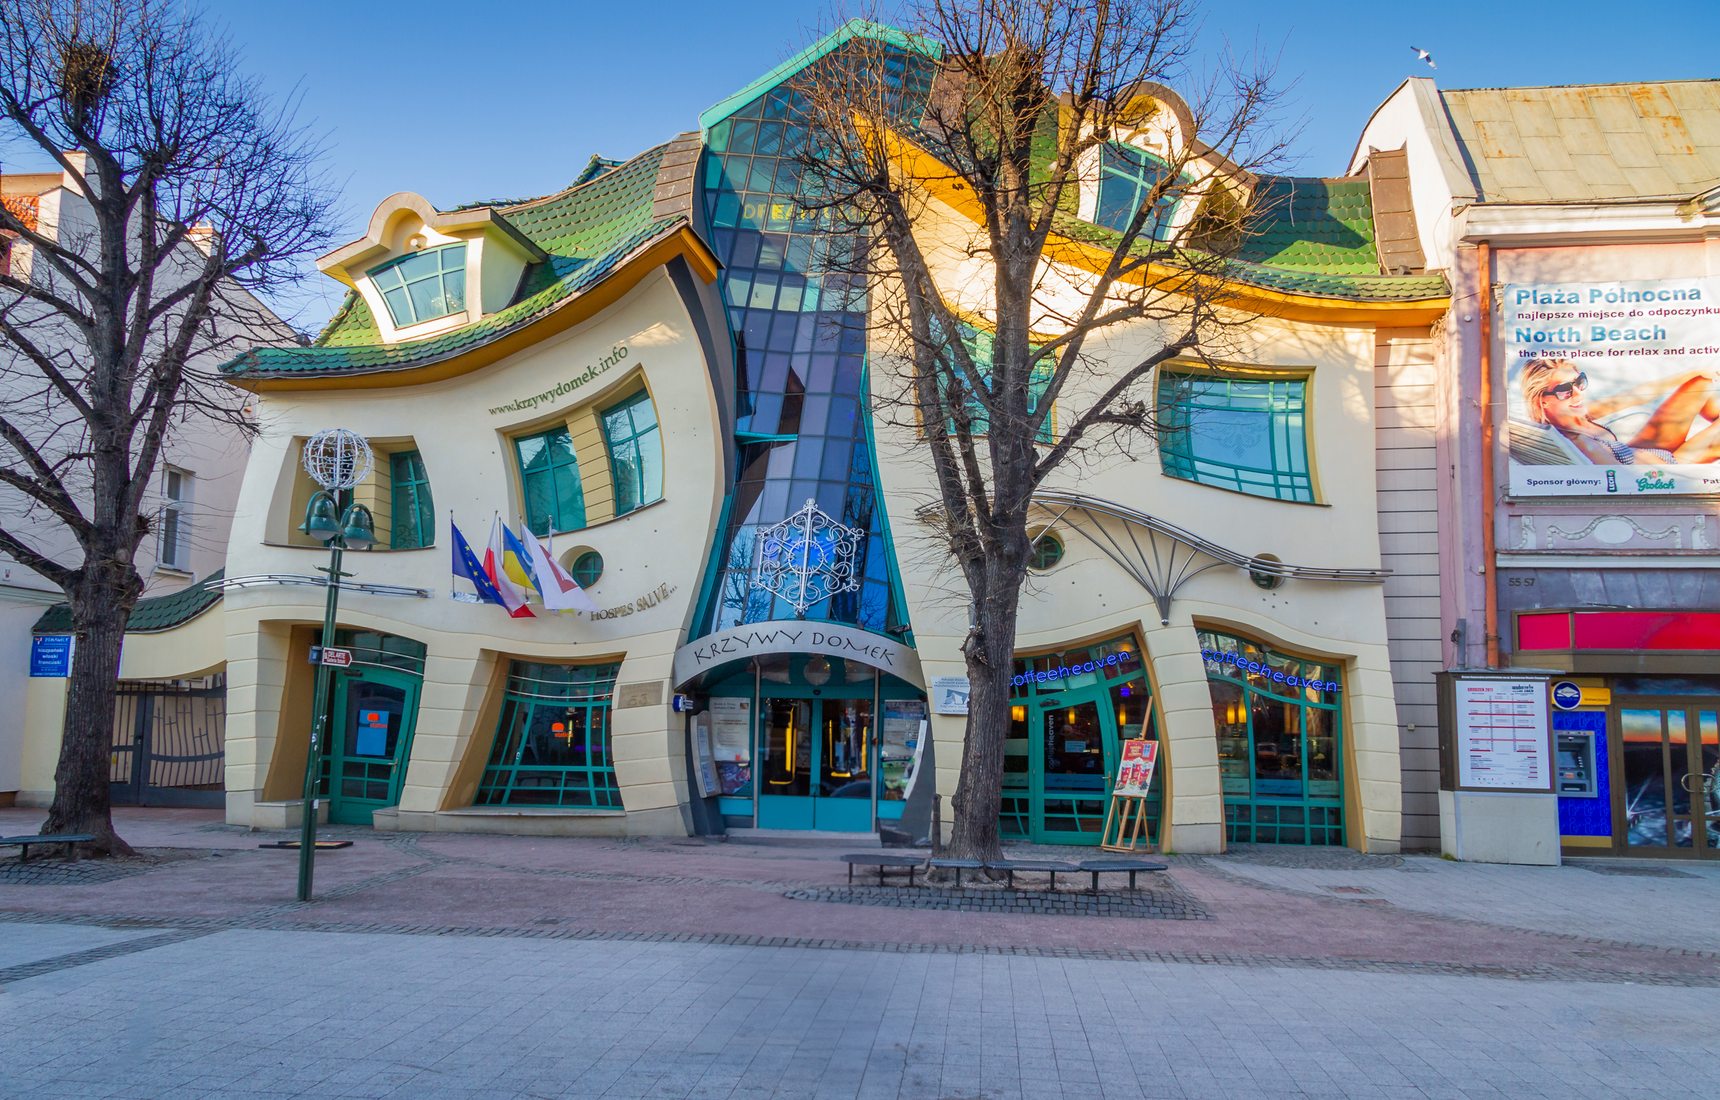 The Crooked House.jpg (454 KB)